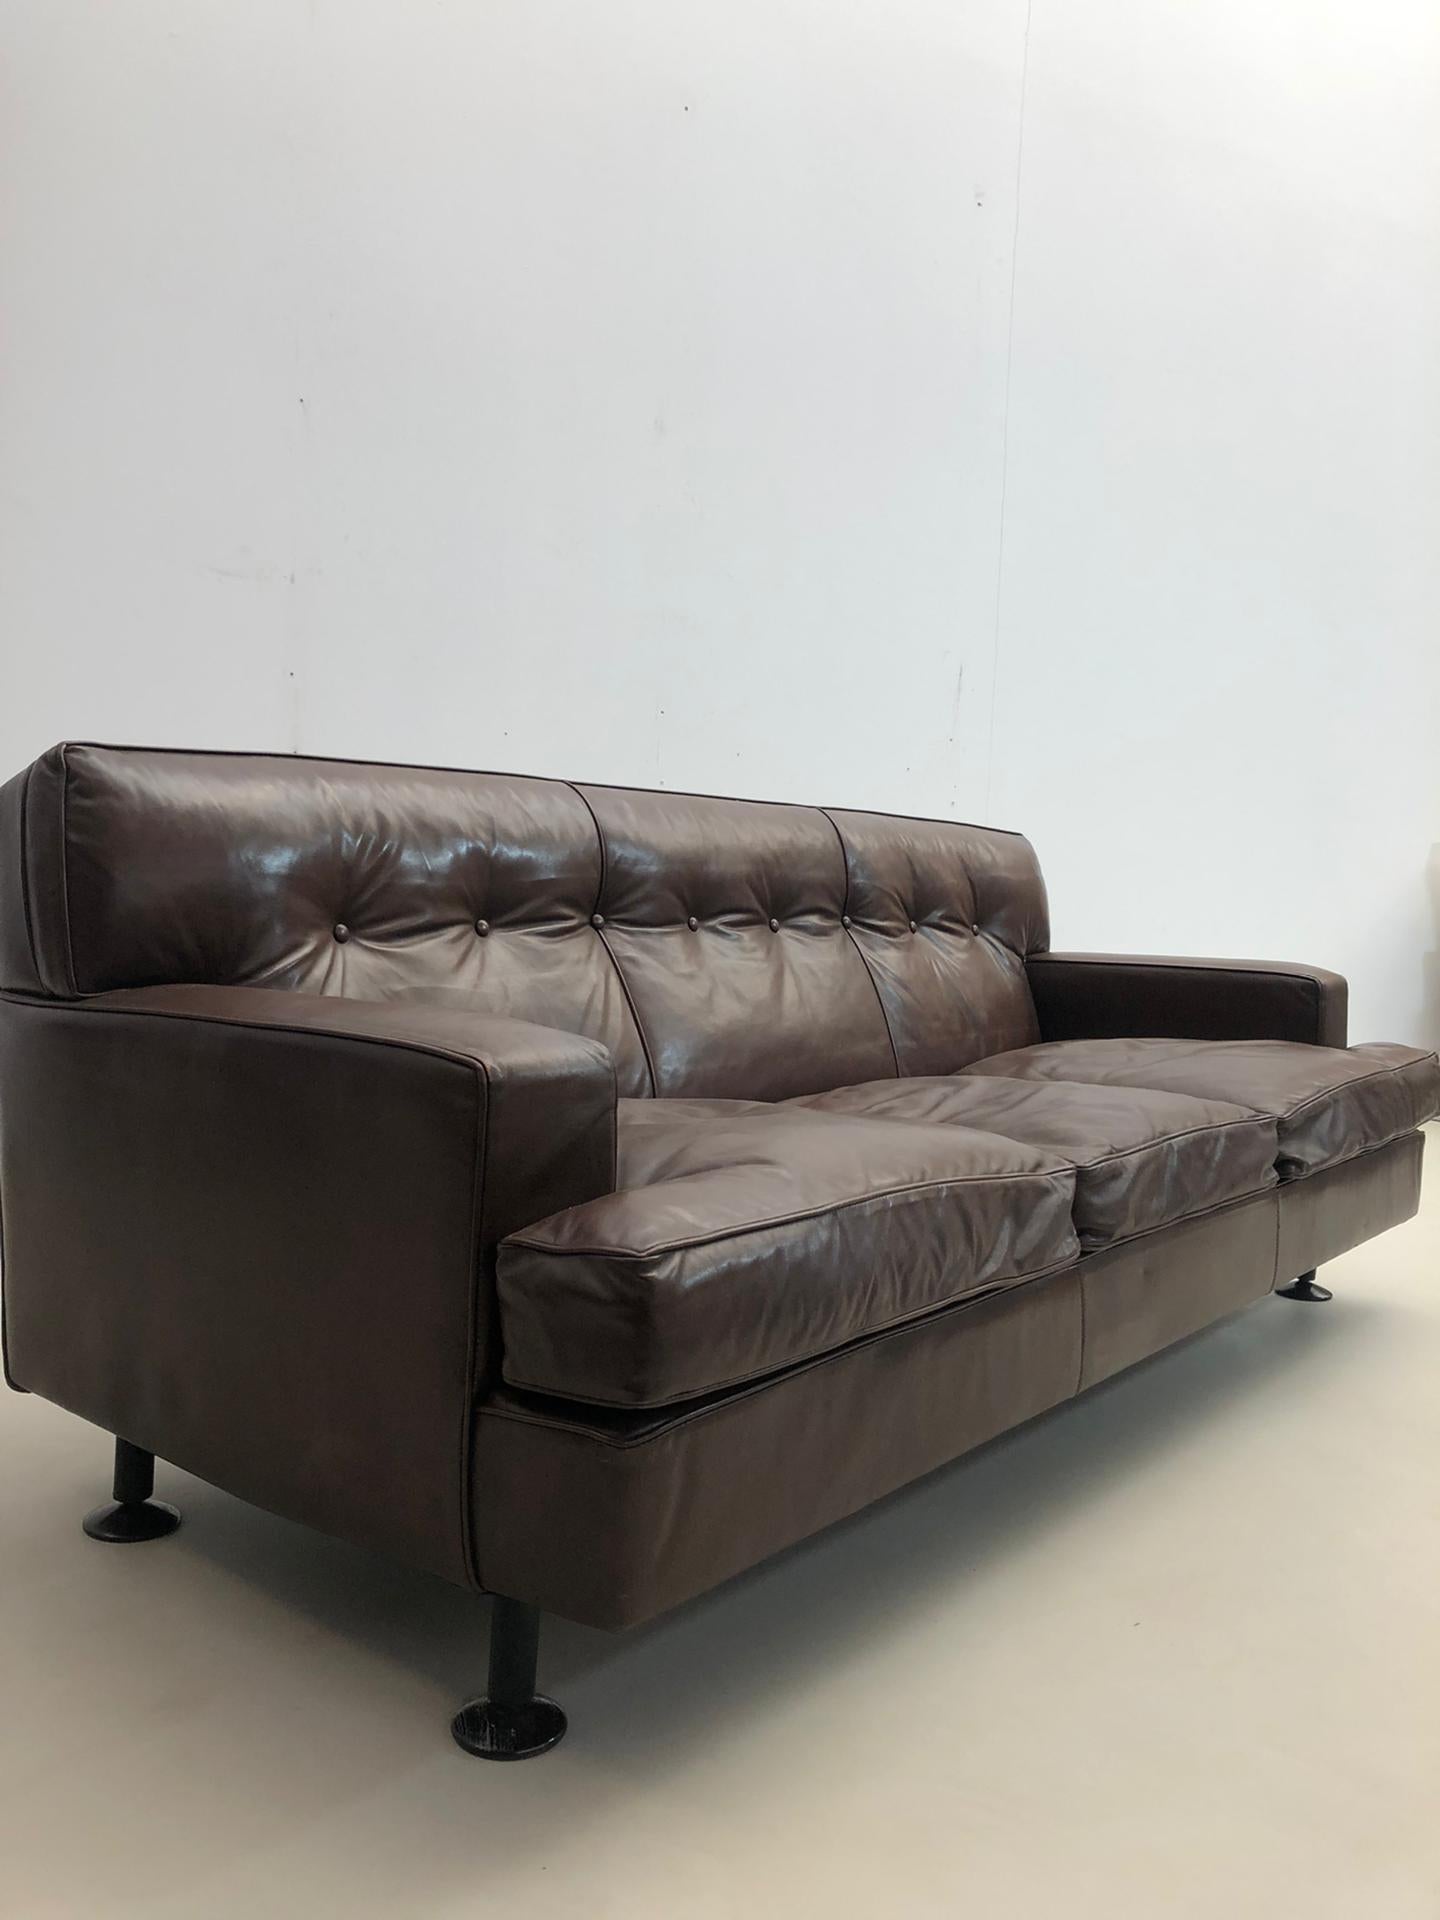 Mid-Century Brown Leather Square Sofa by Marco Zanuso for Arflex, 1960s For Sale 9